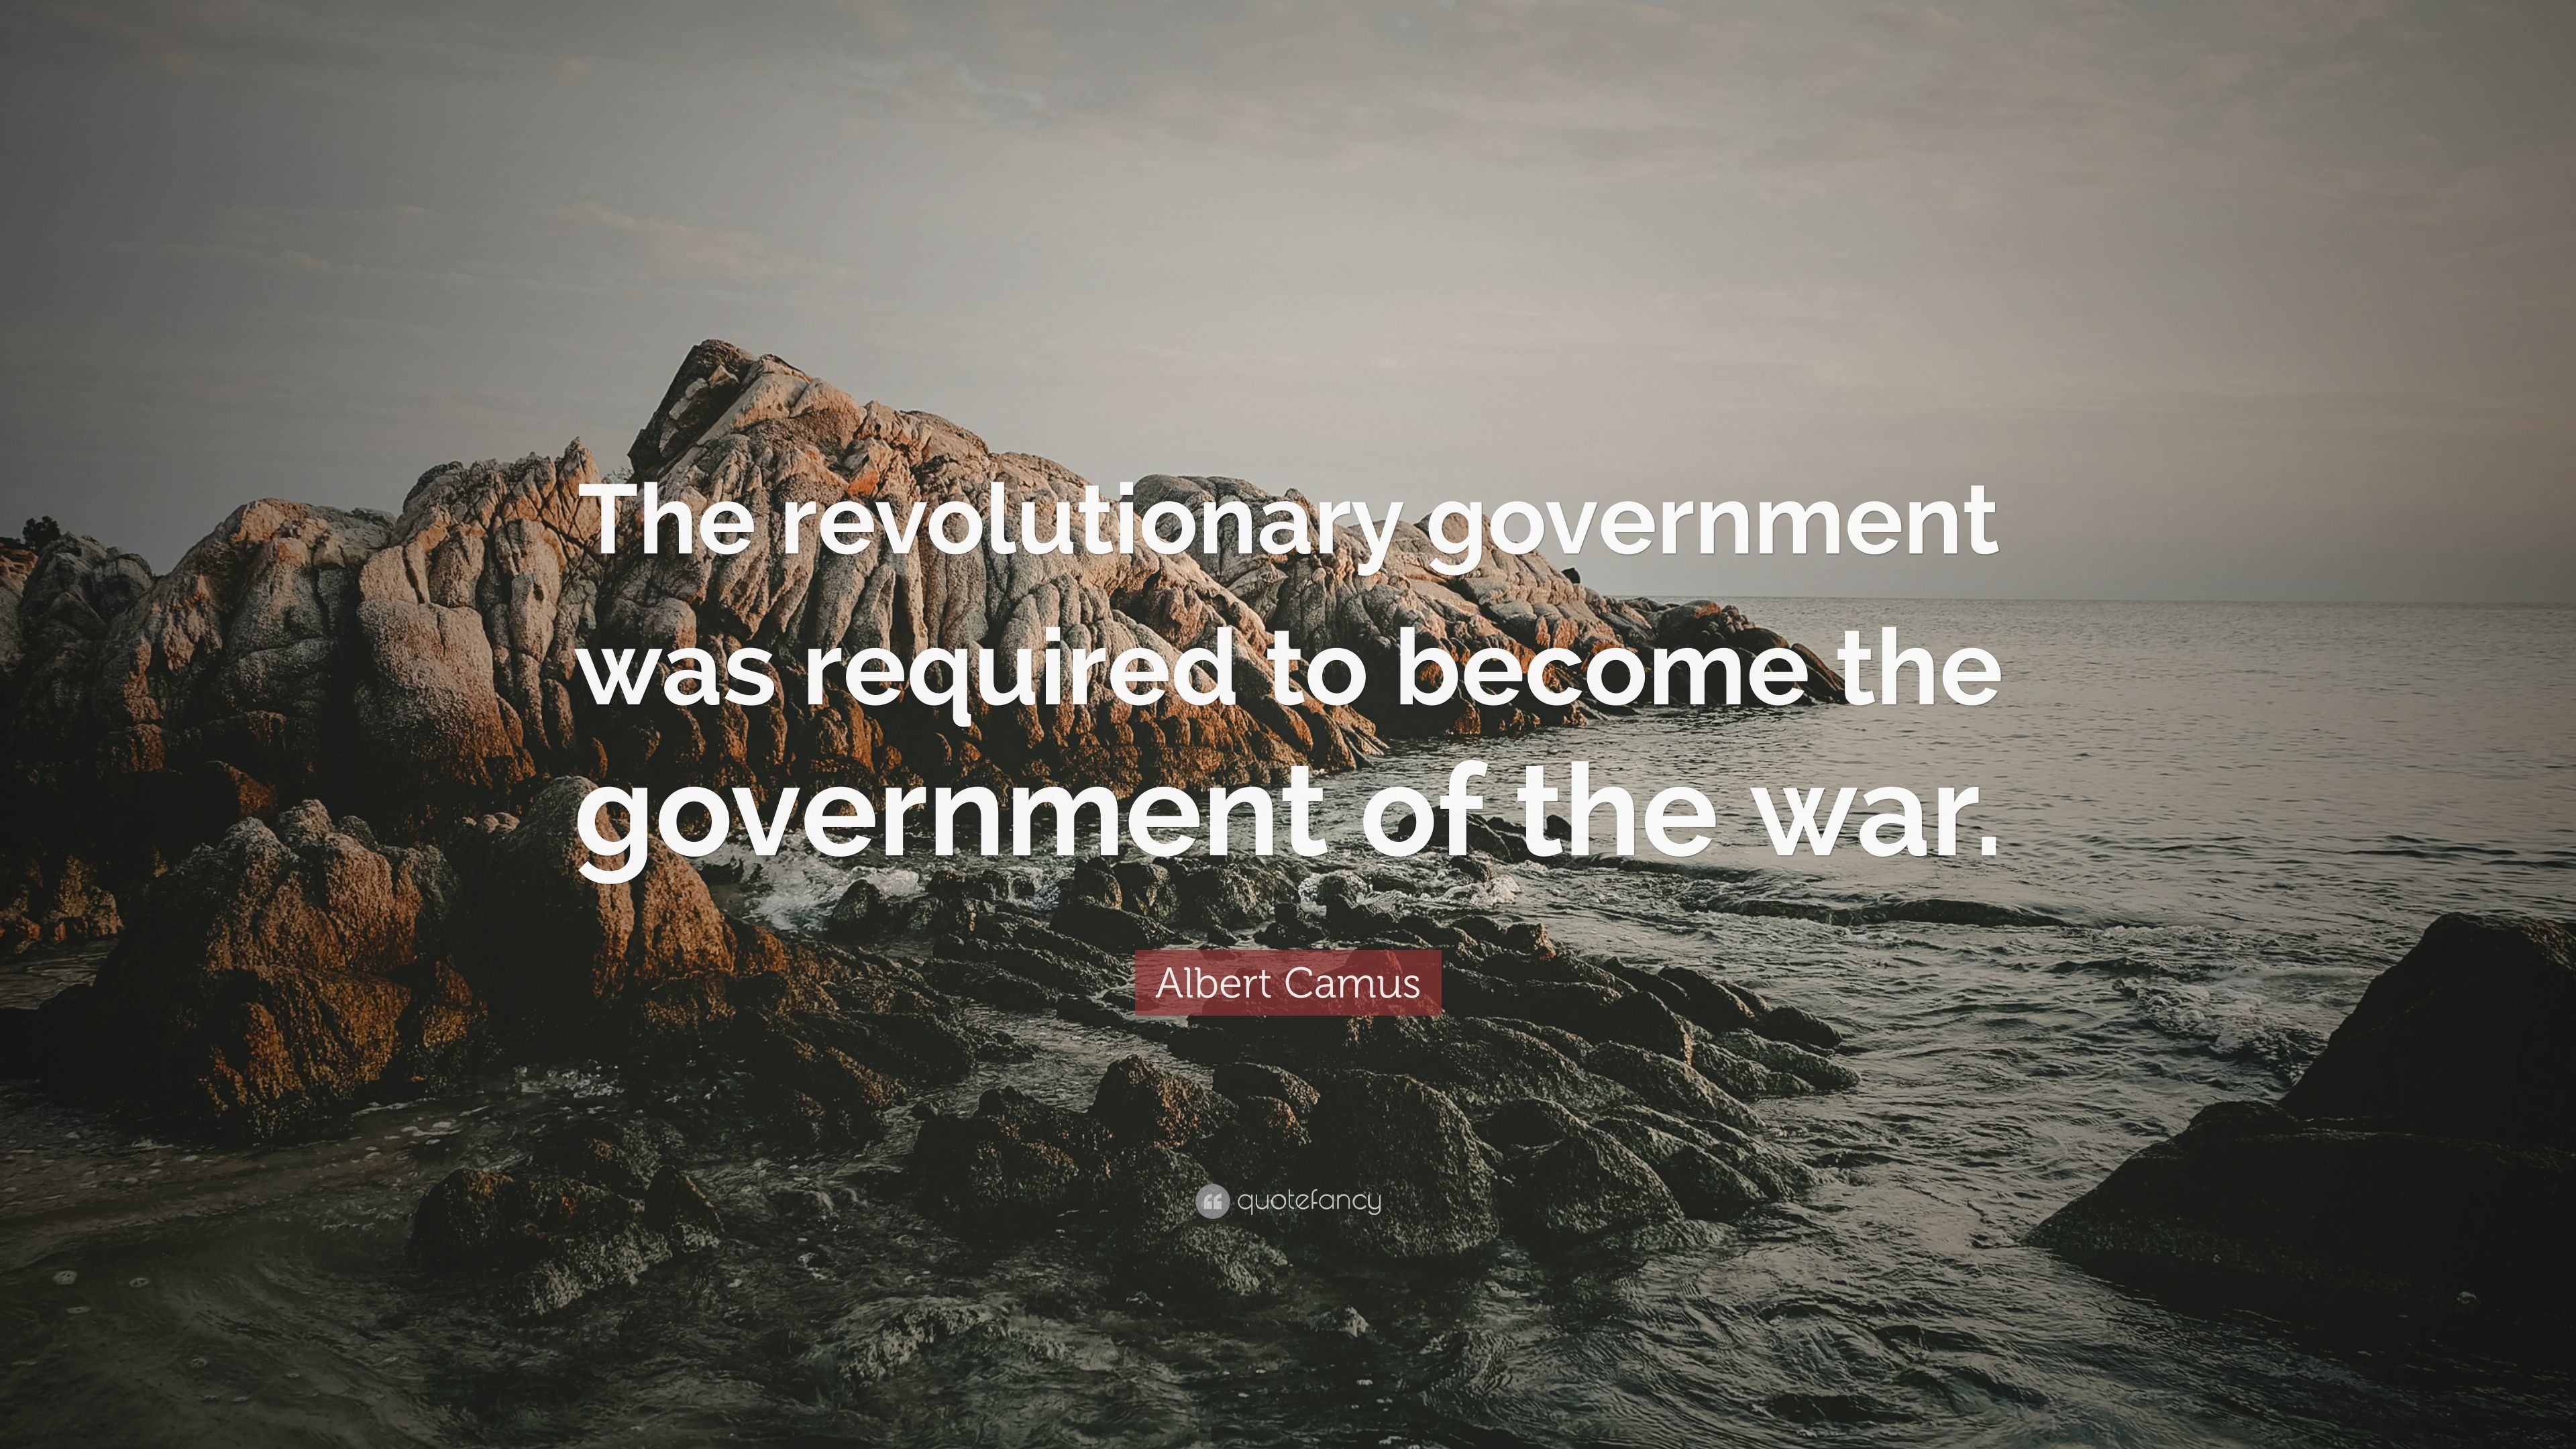 3840x2160 Albert Camus Quote: “The revolutionary government was required to become  the government of the